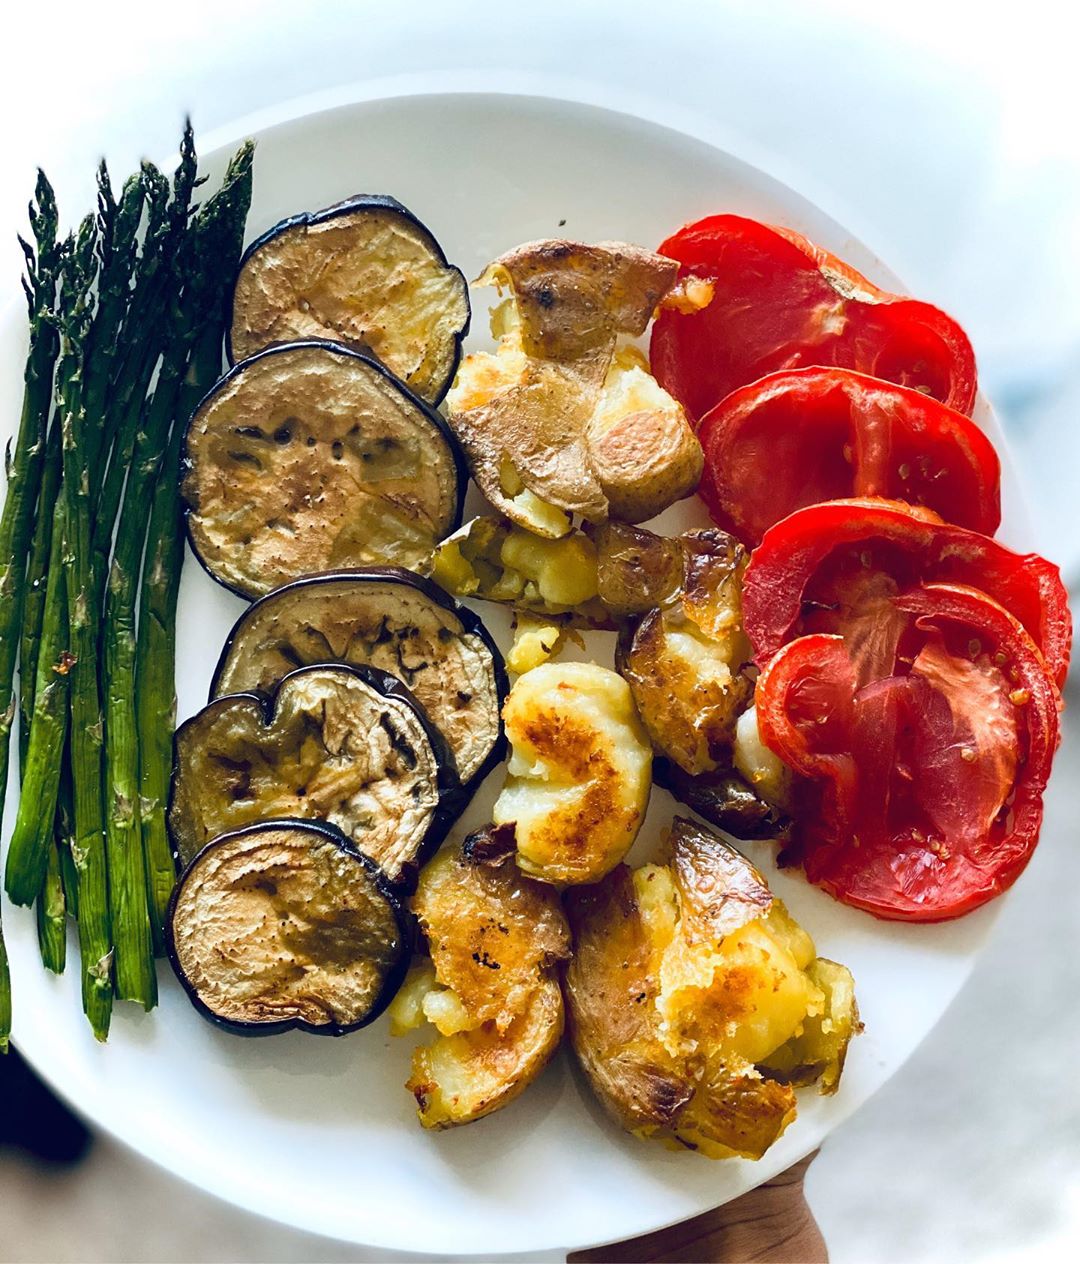 I've been so into roasted veggies recently, they're delicious! - Elle Valentine